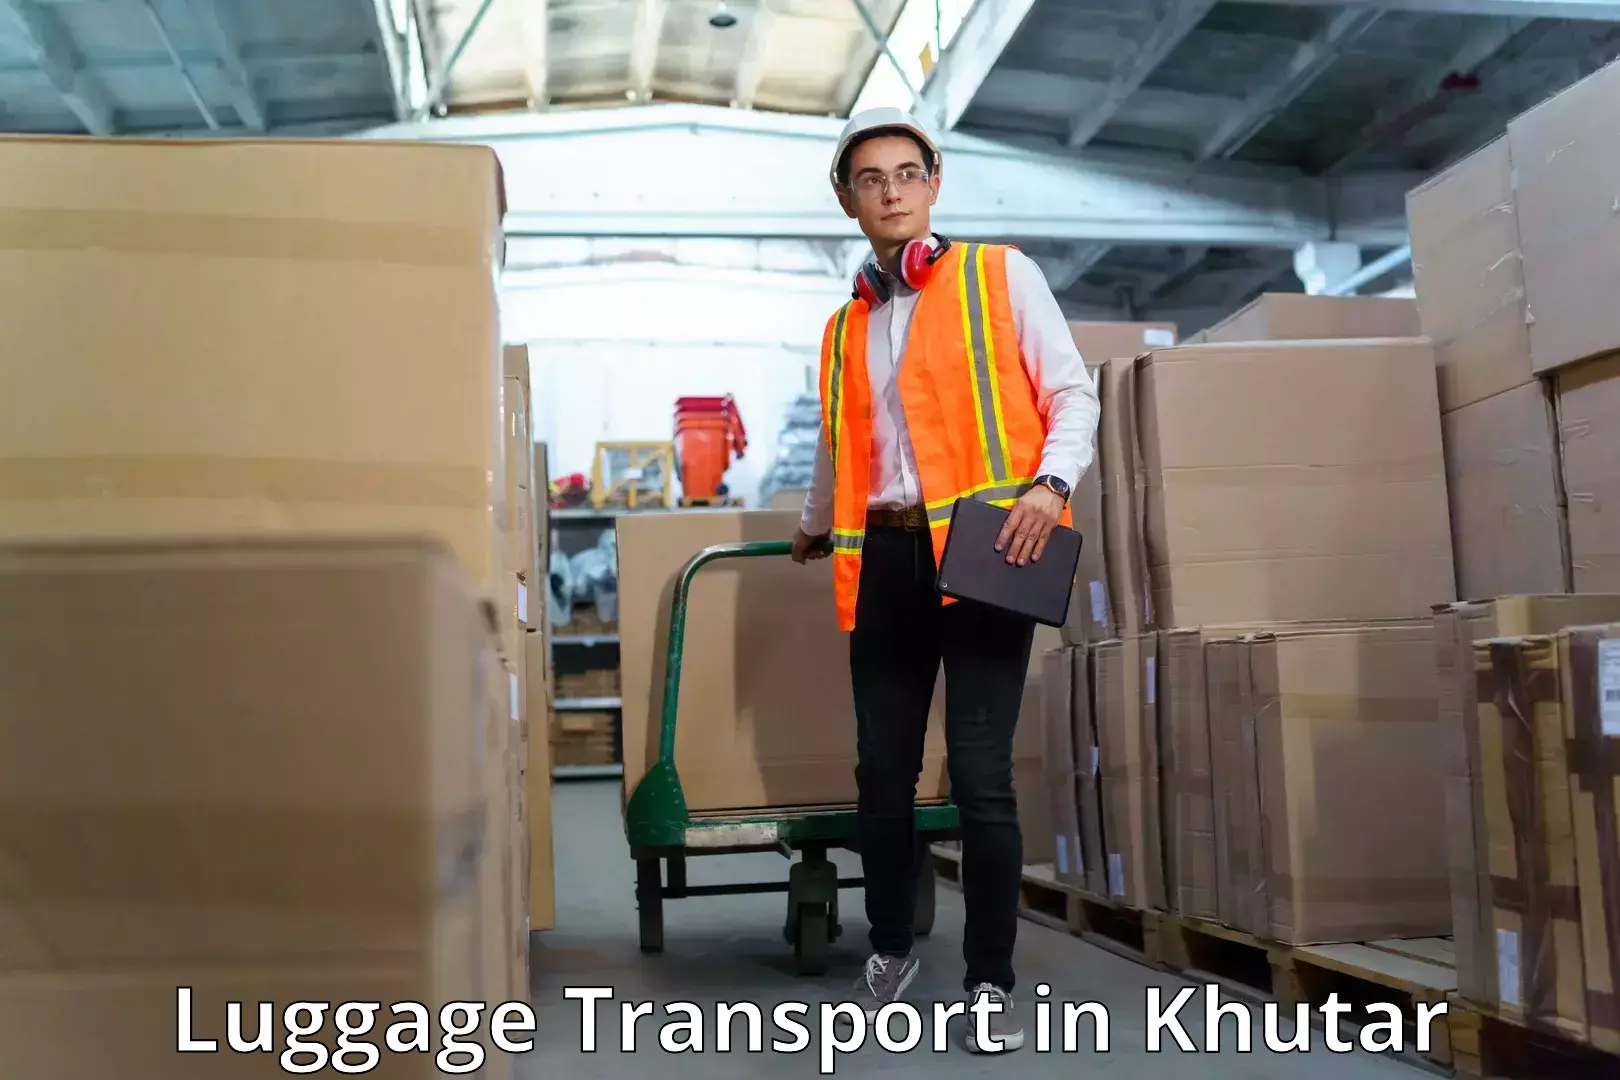 Automated luggage transport in Khutar